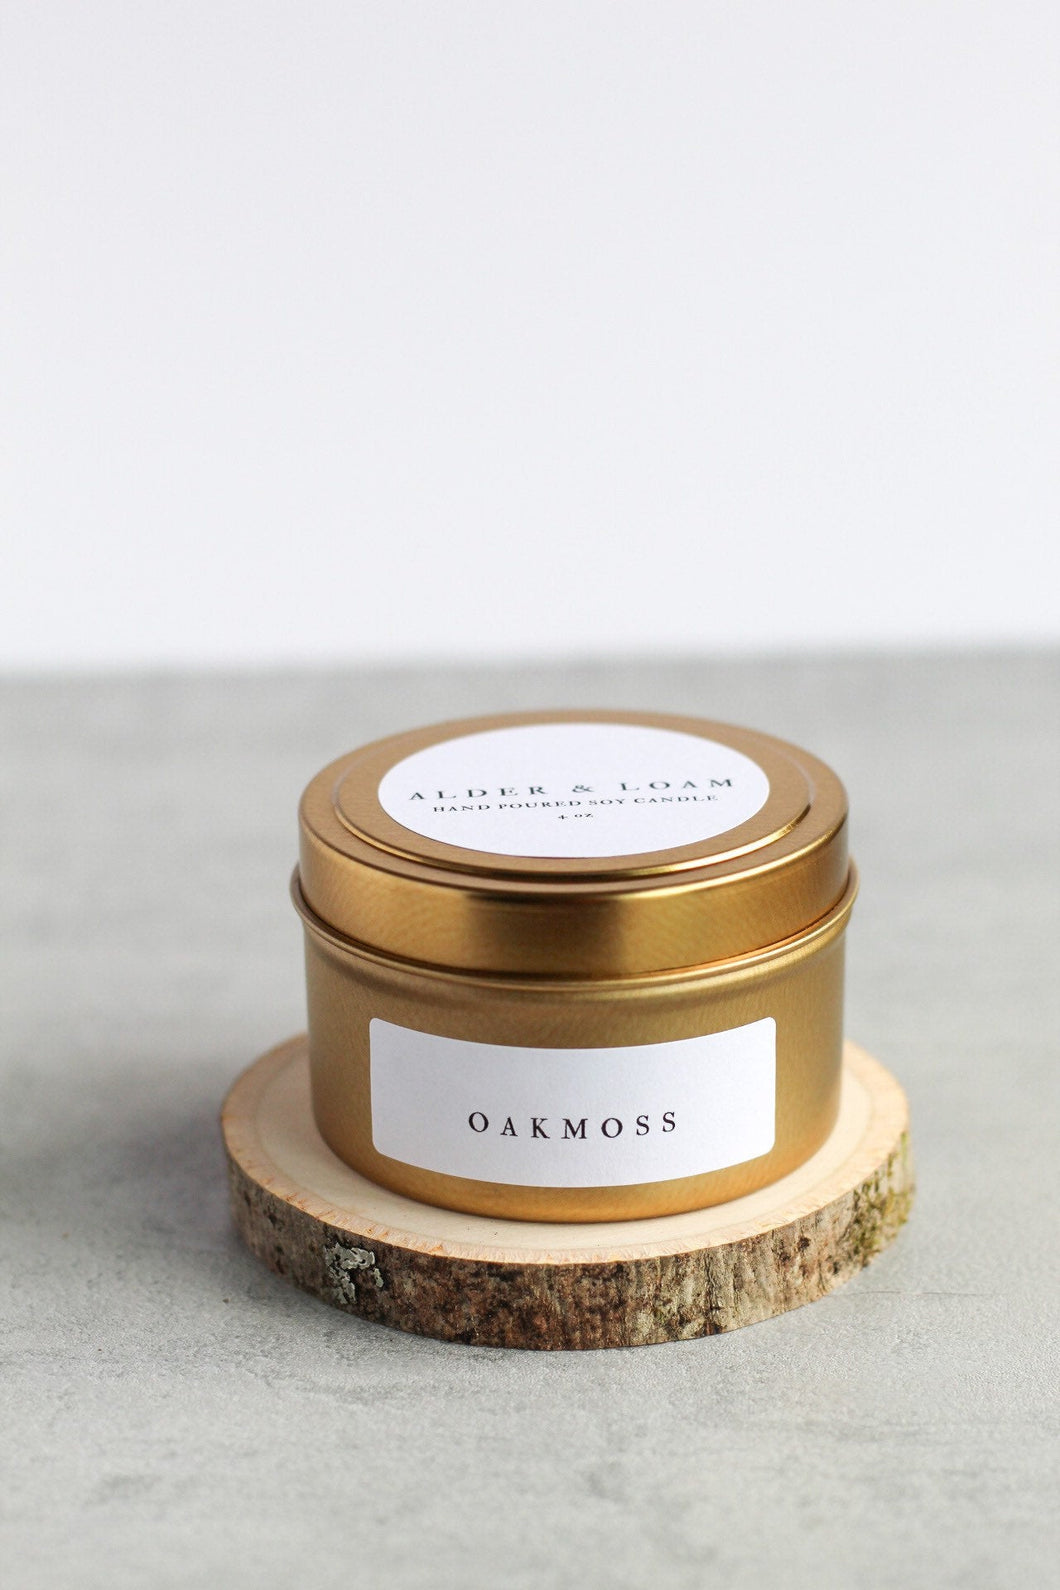 Oakmoss Soy Candle, Hand Poured, Natural, Eco Friendly, Earthy Scent, 4 oz Tin